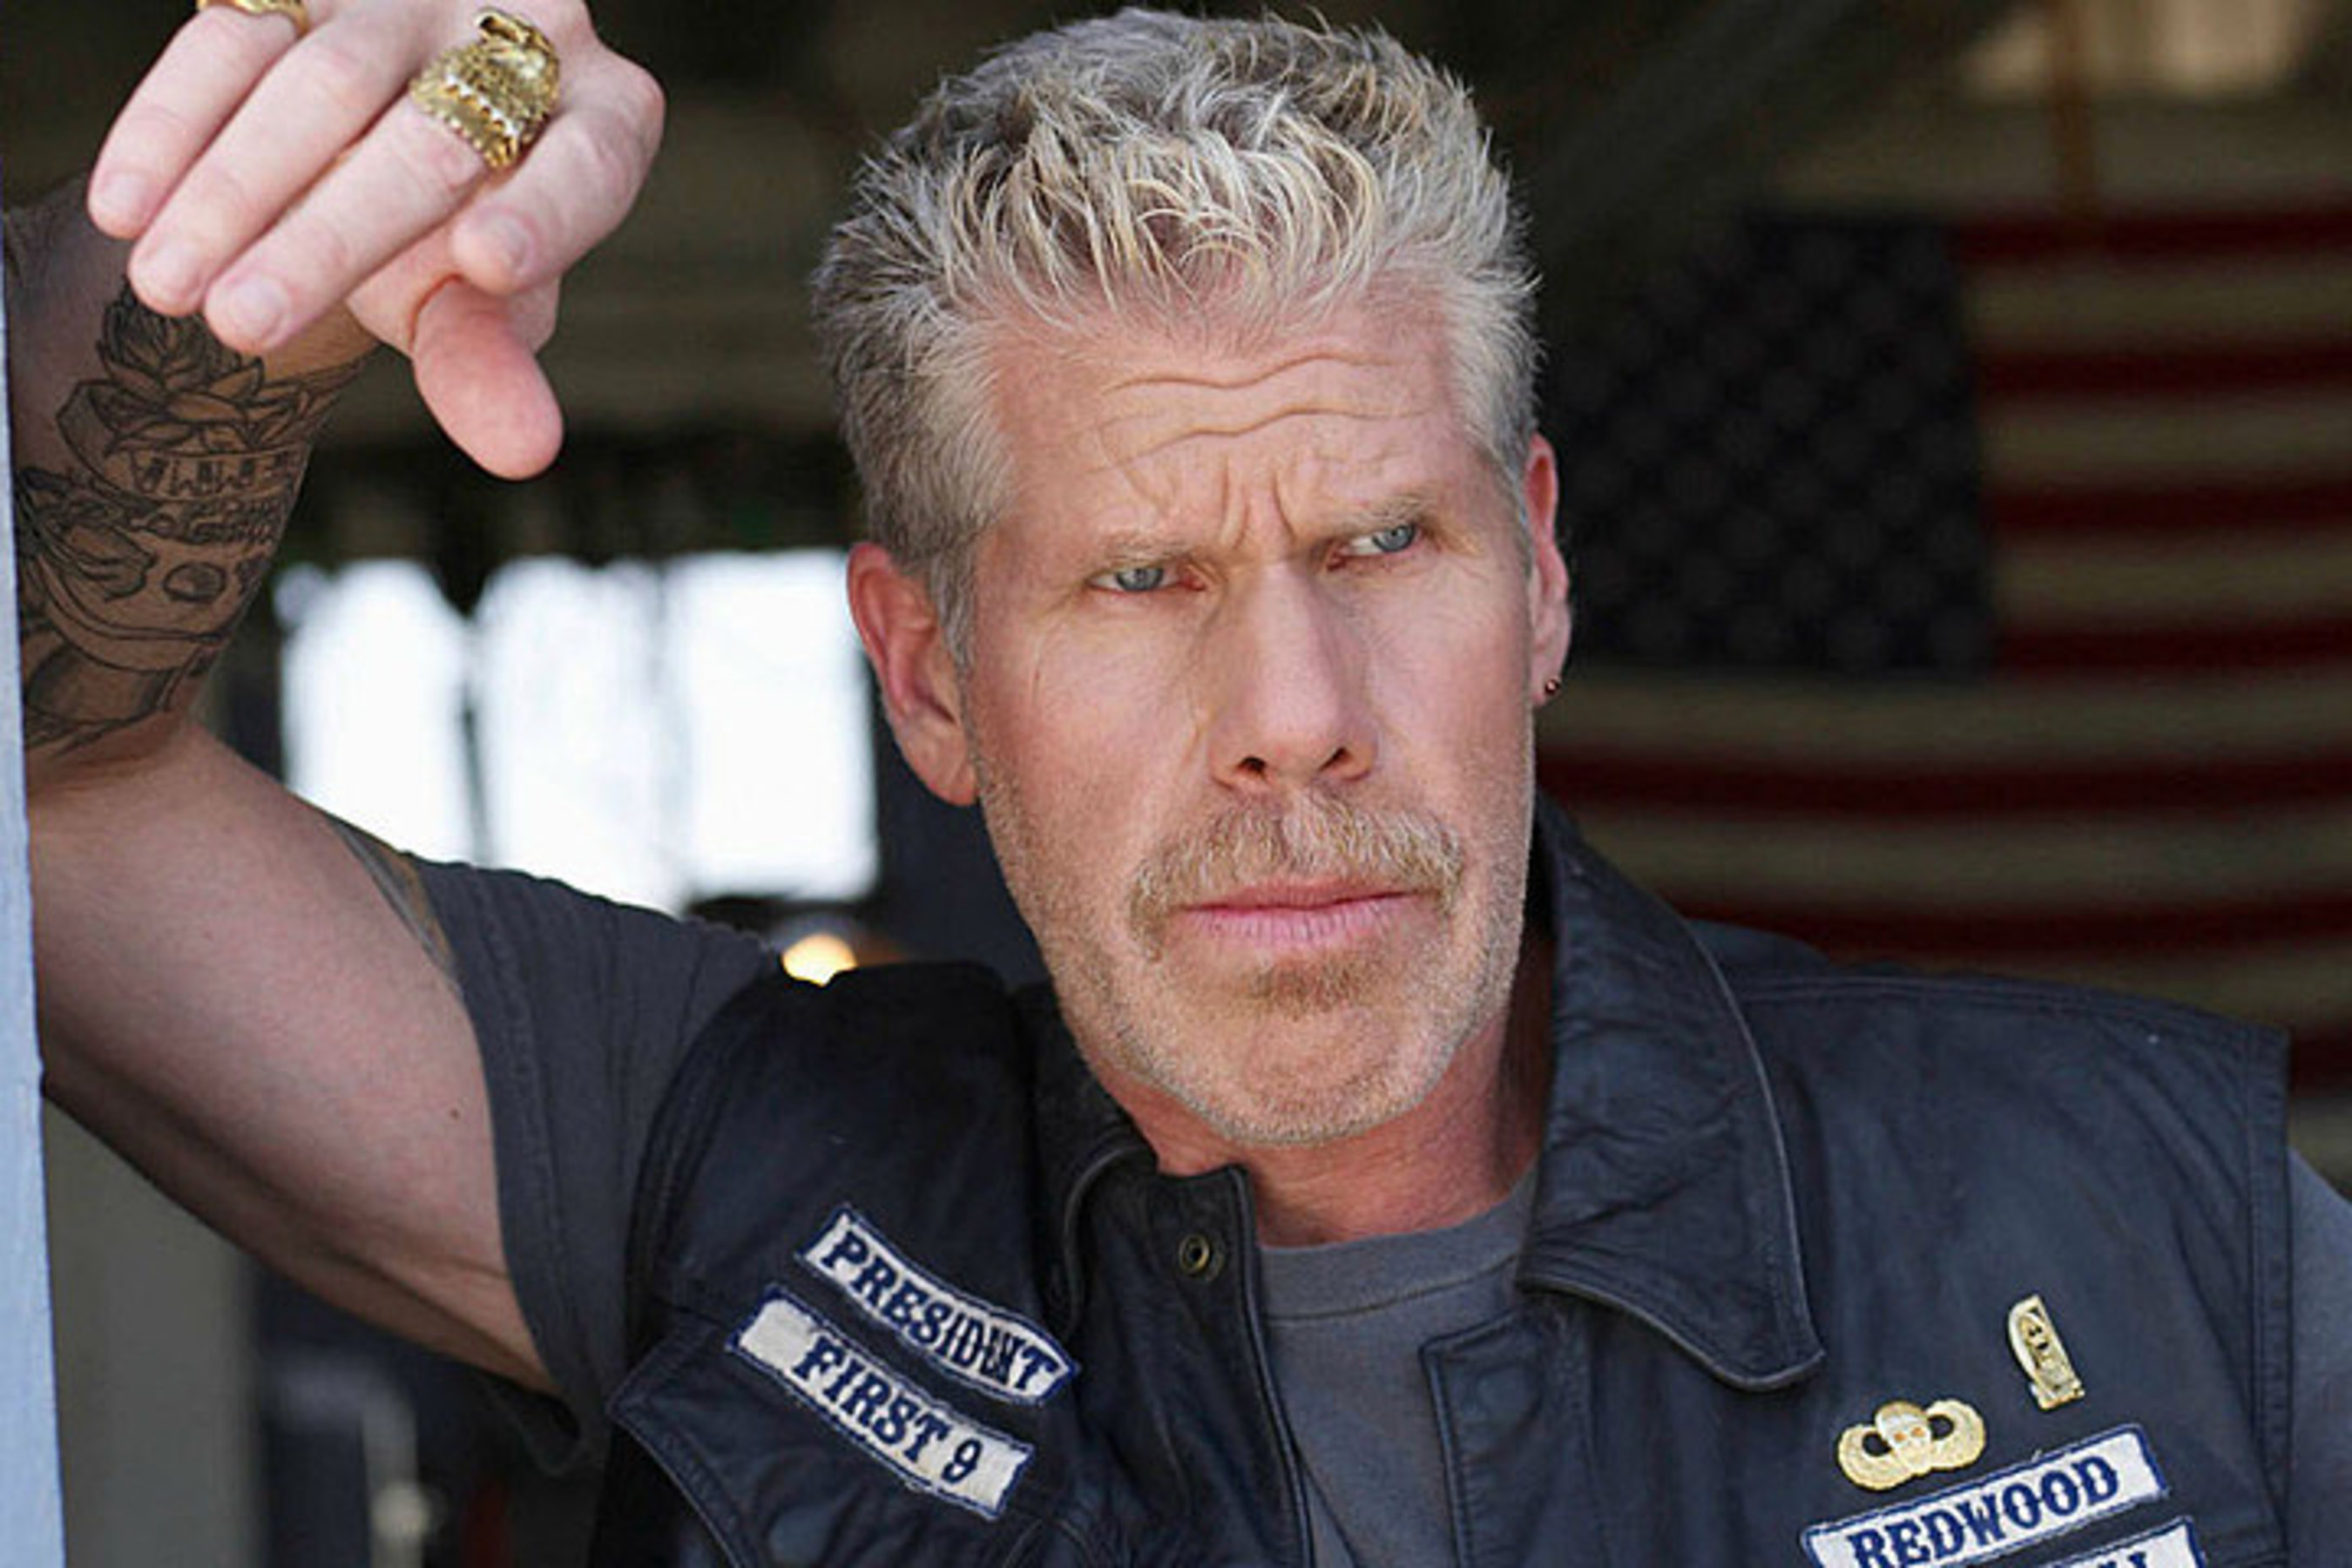 Ron Perlman Sons of Anarchy Star embraces the Carry the Challenge ONE campaign.